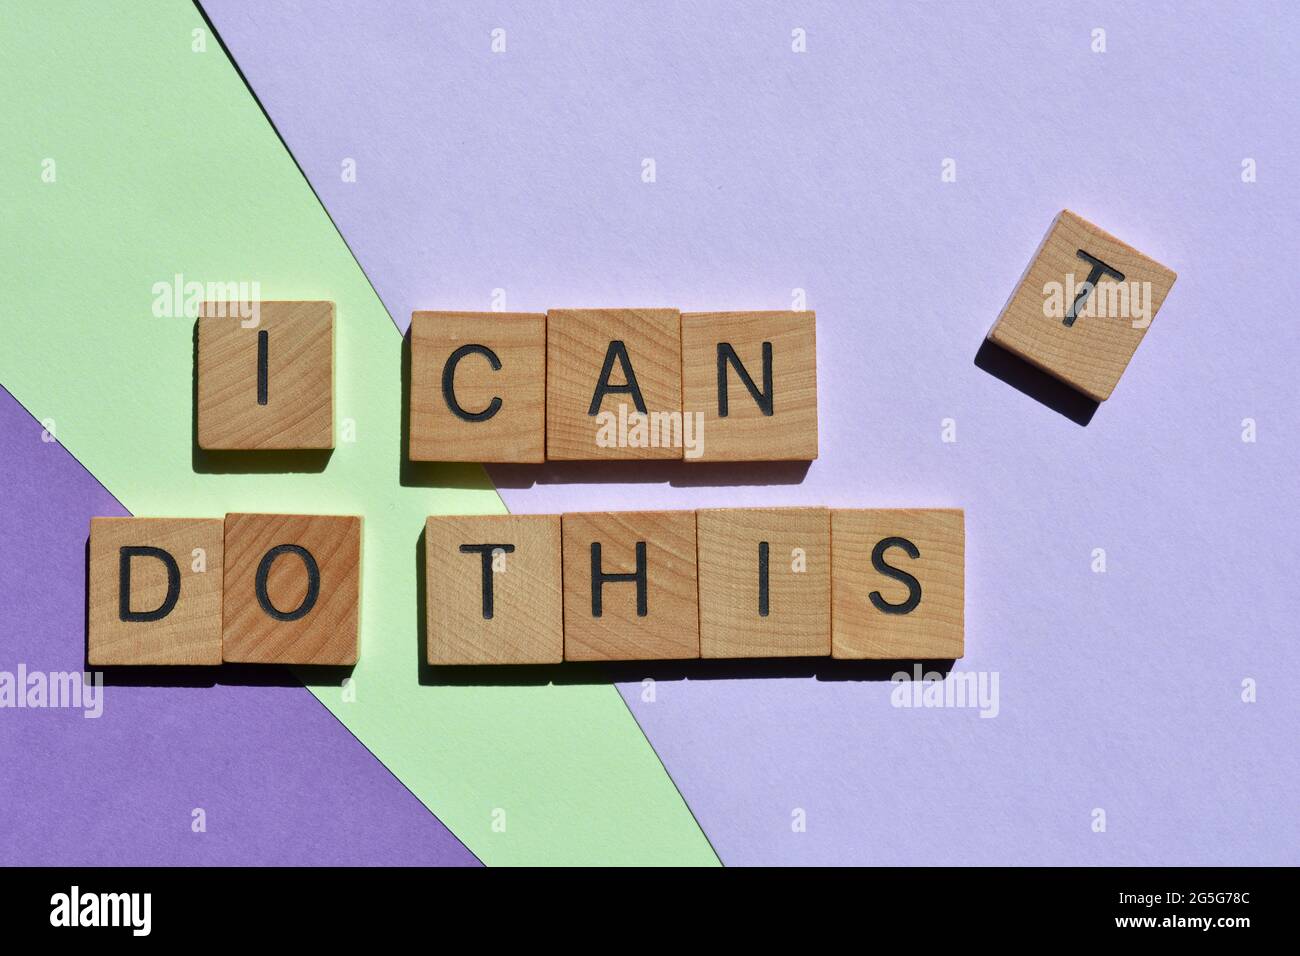 I Can / Can't Do This, motivational words in wooden alphabet letters Stock Photo